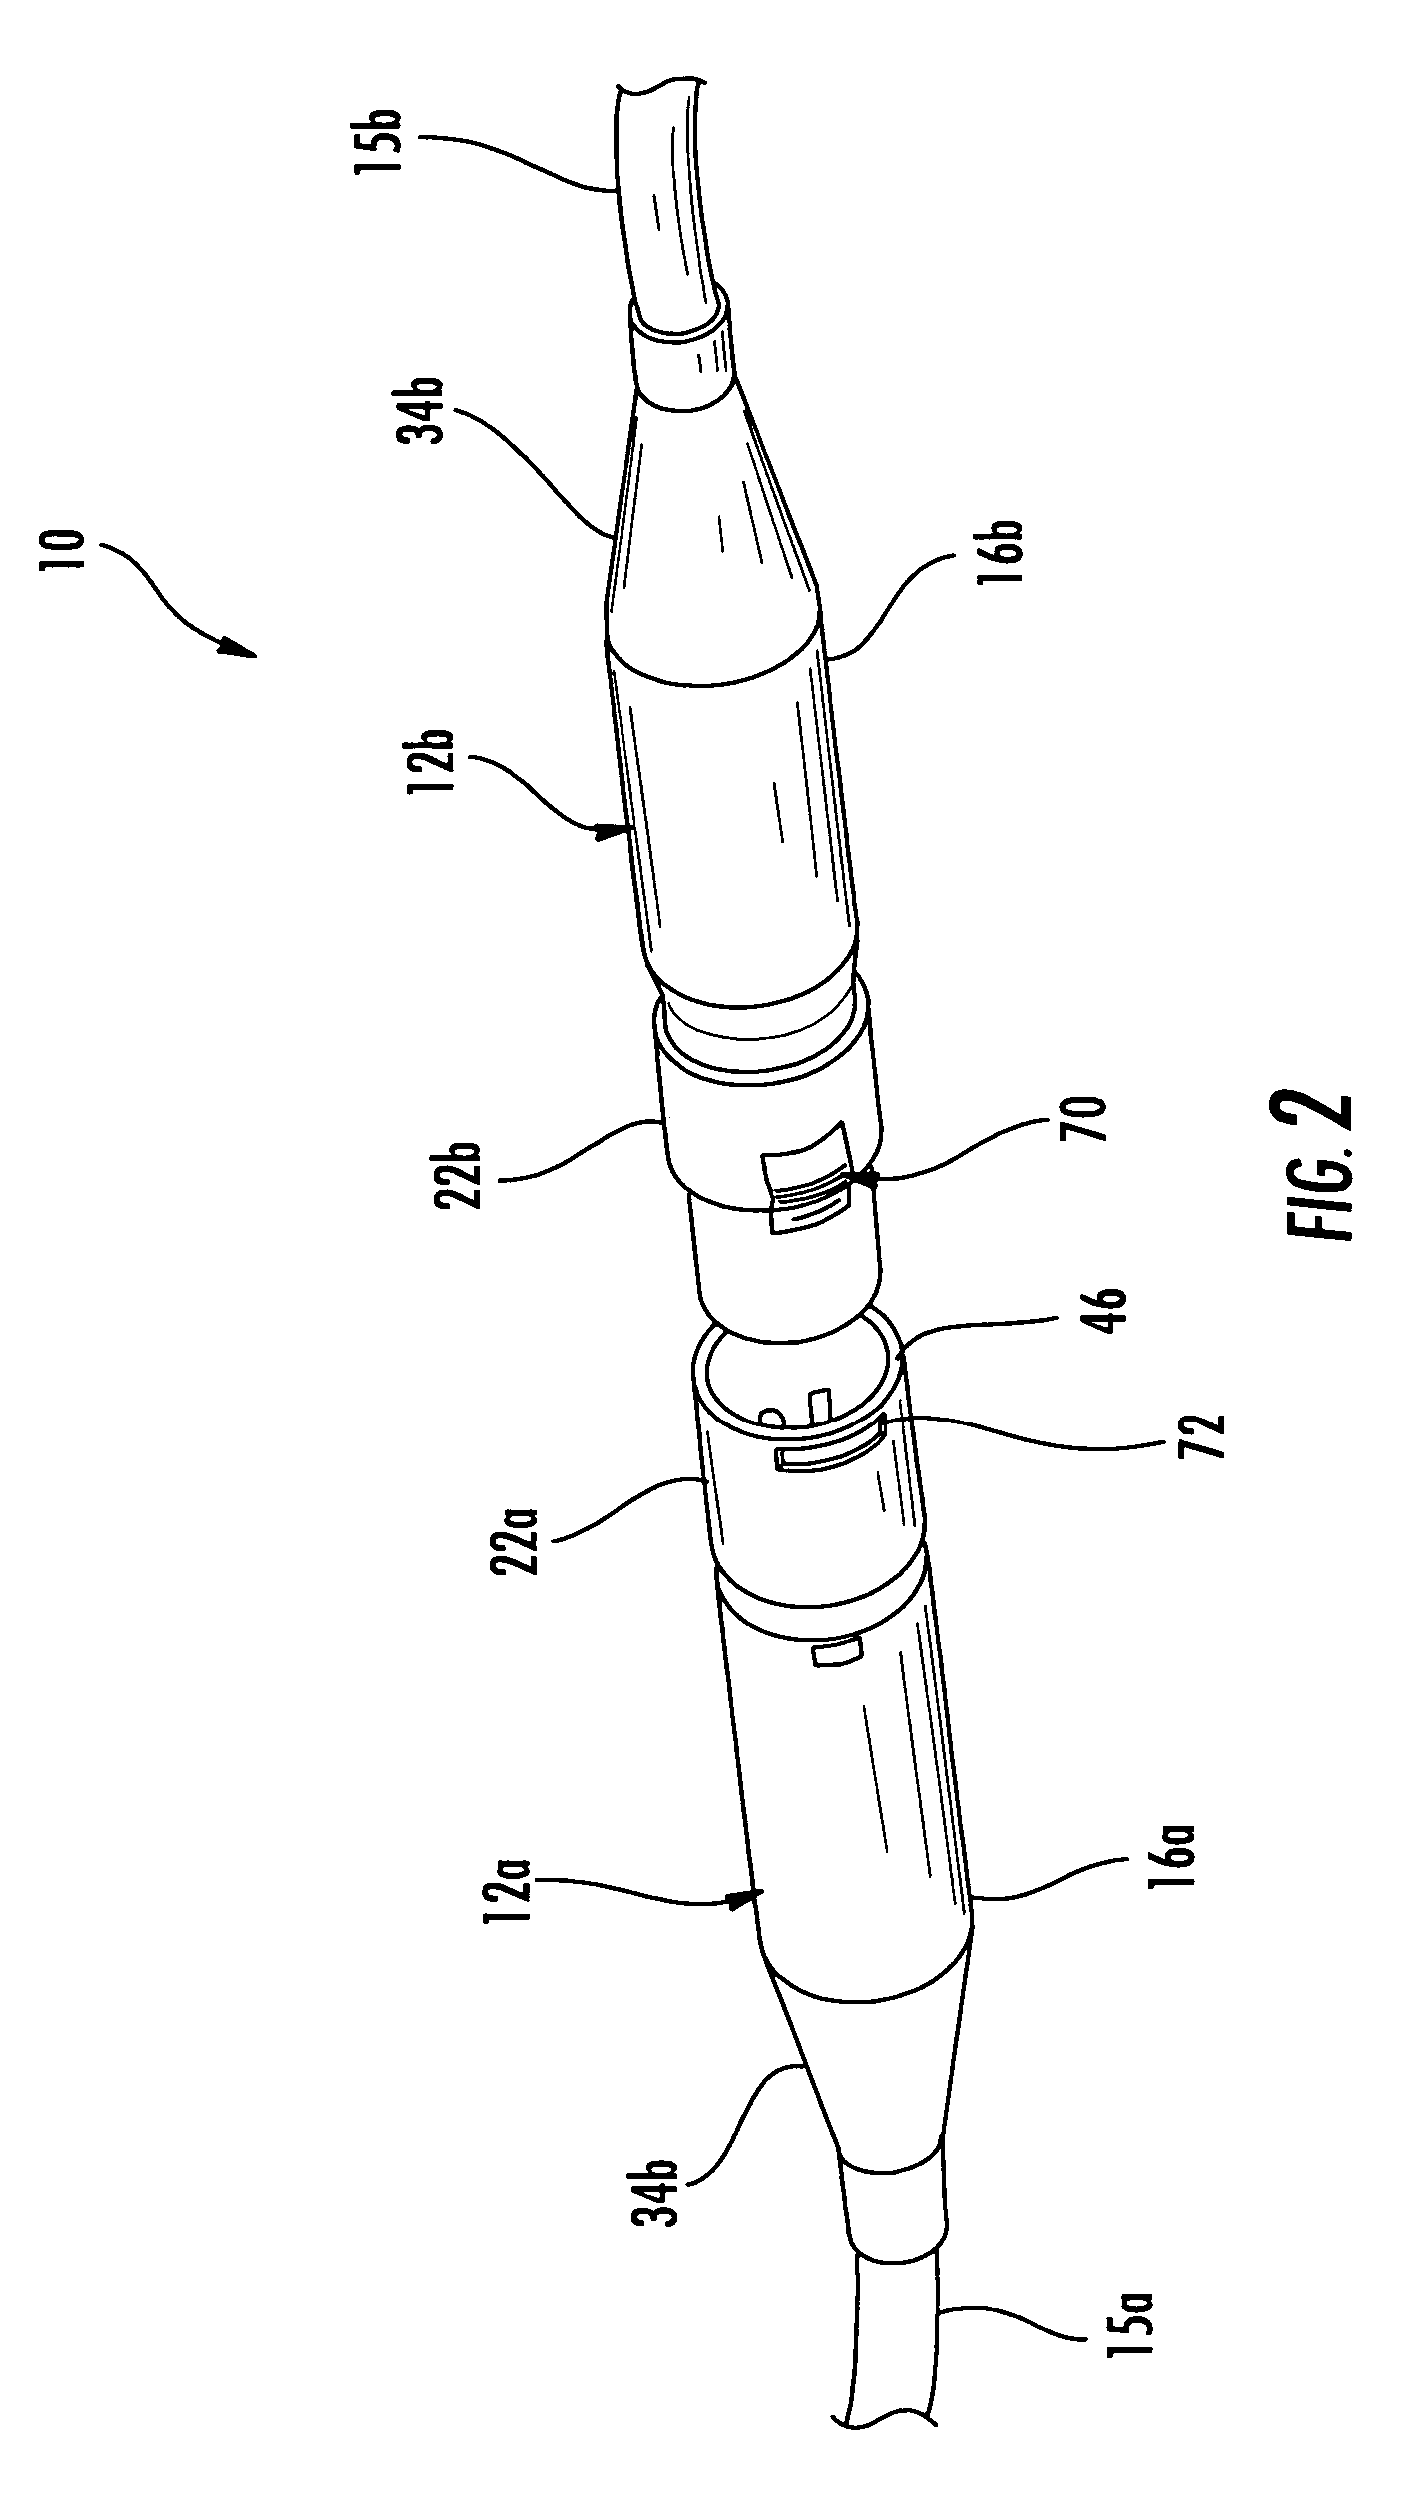 Harsh environment connector including single-level or dual-level bladder and associated methods